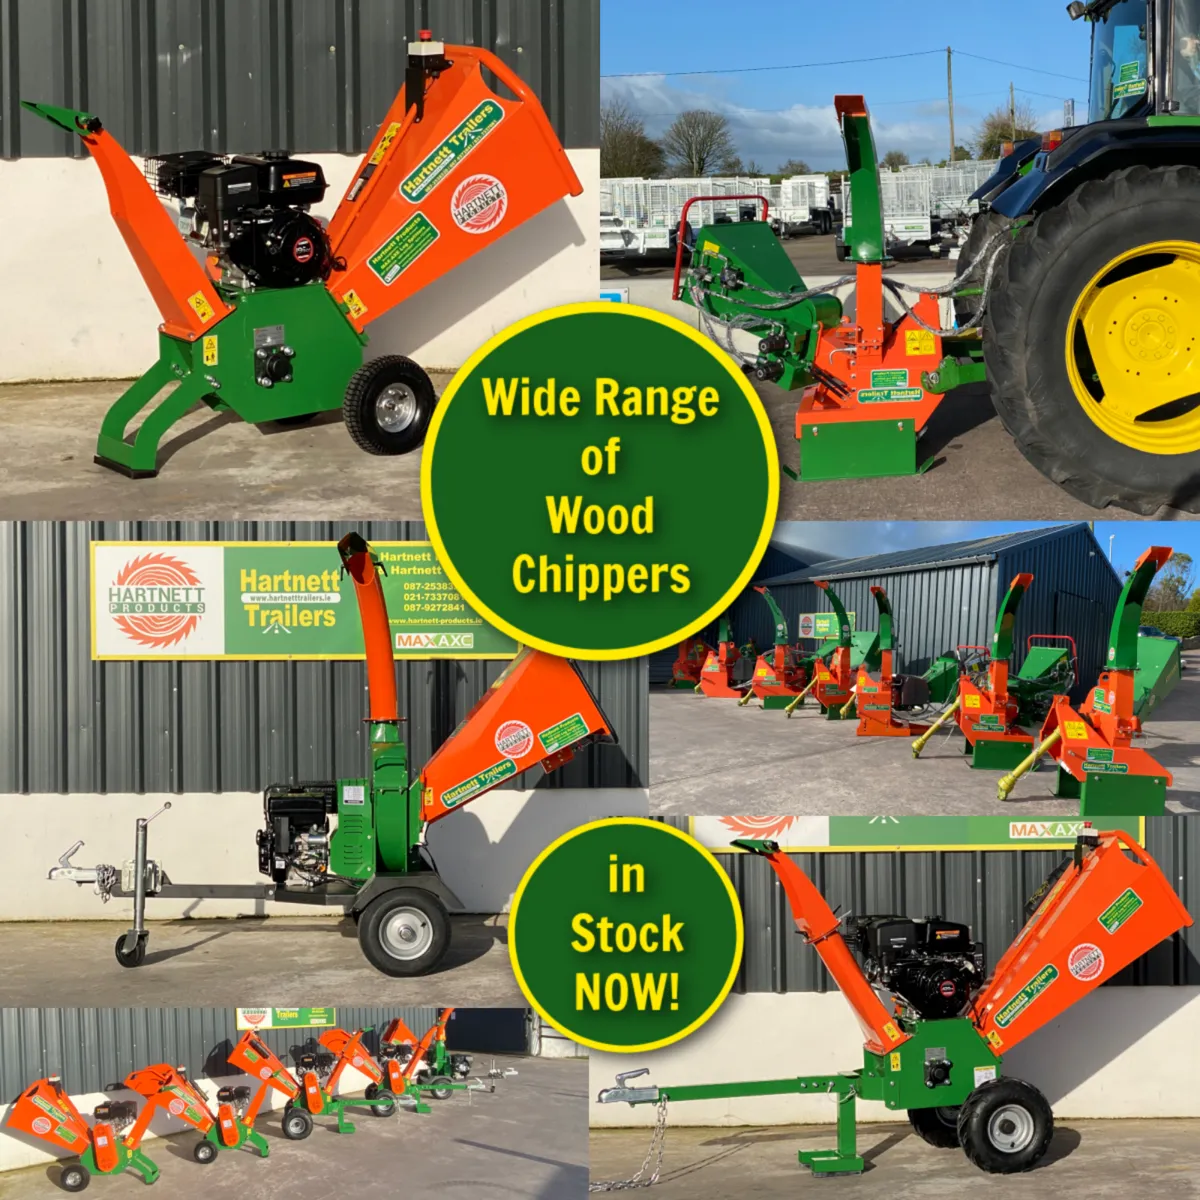 Wood Chippers for Sale